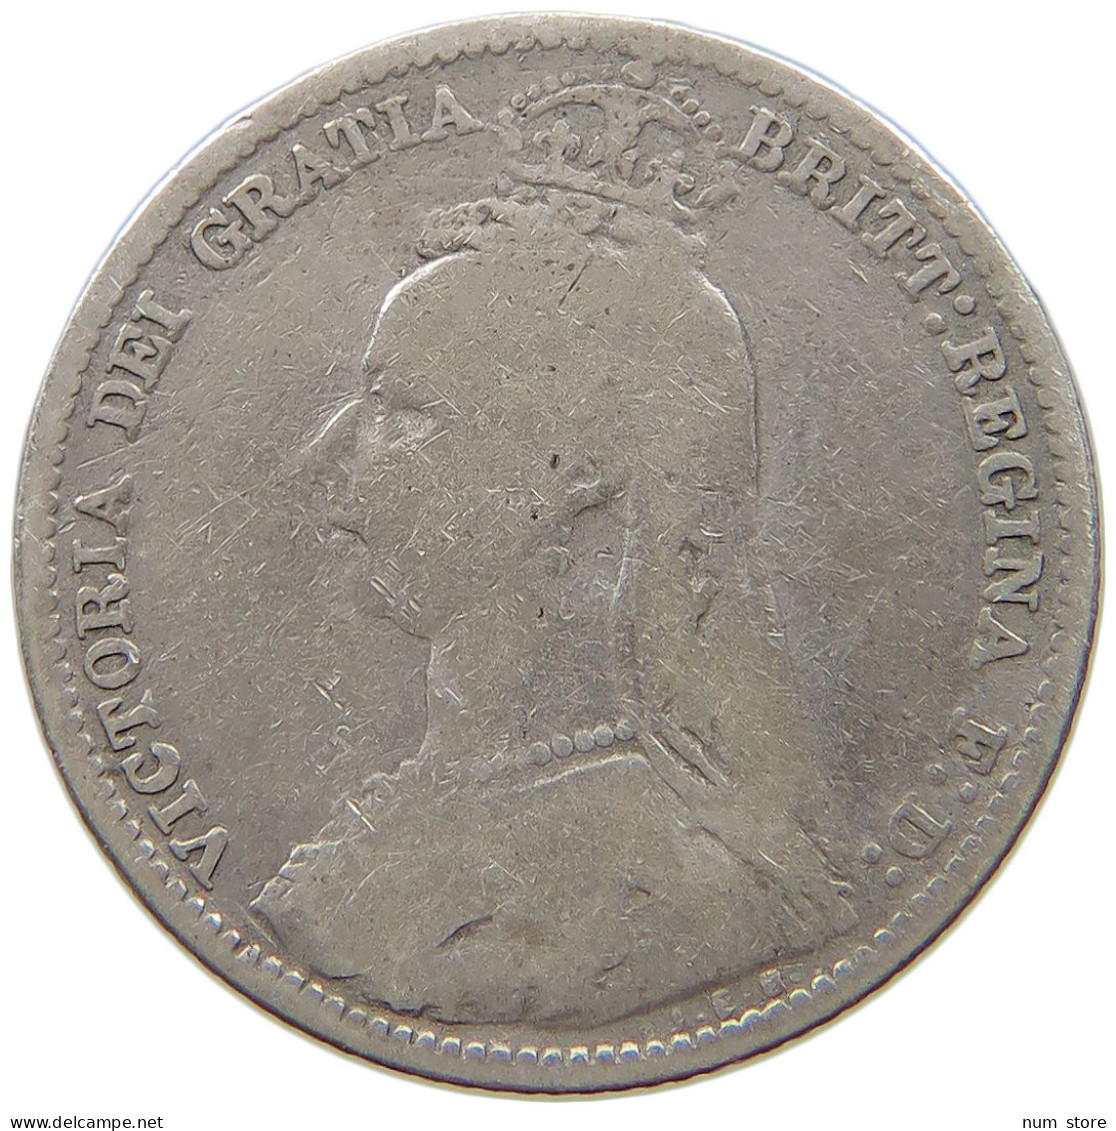 GREAT BRITAIN SIXPENCE 1891 Victoria 1837-1901 #a004 0015 - H. 6 Pence